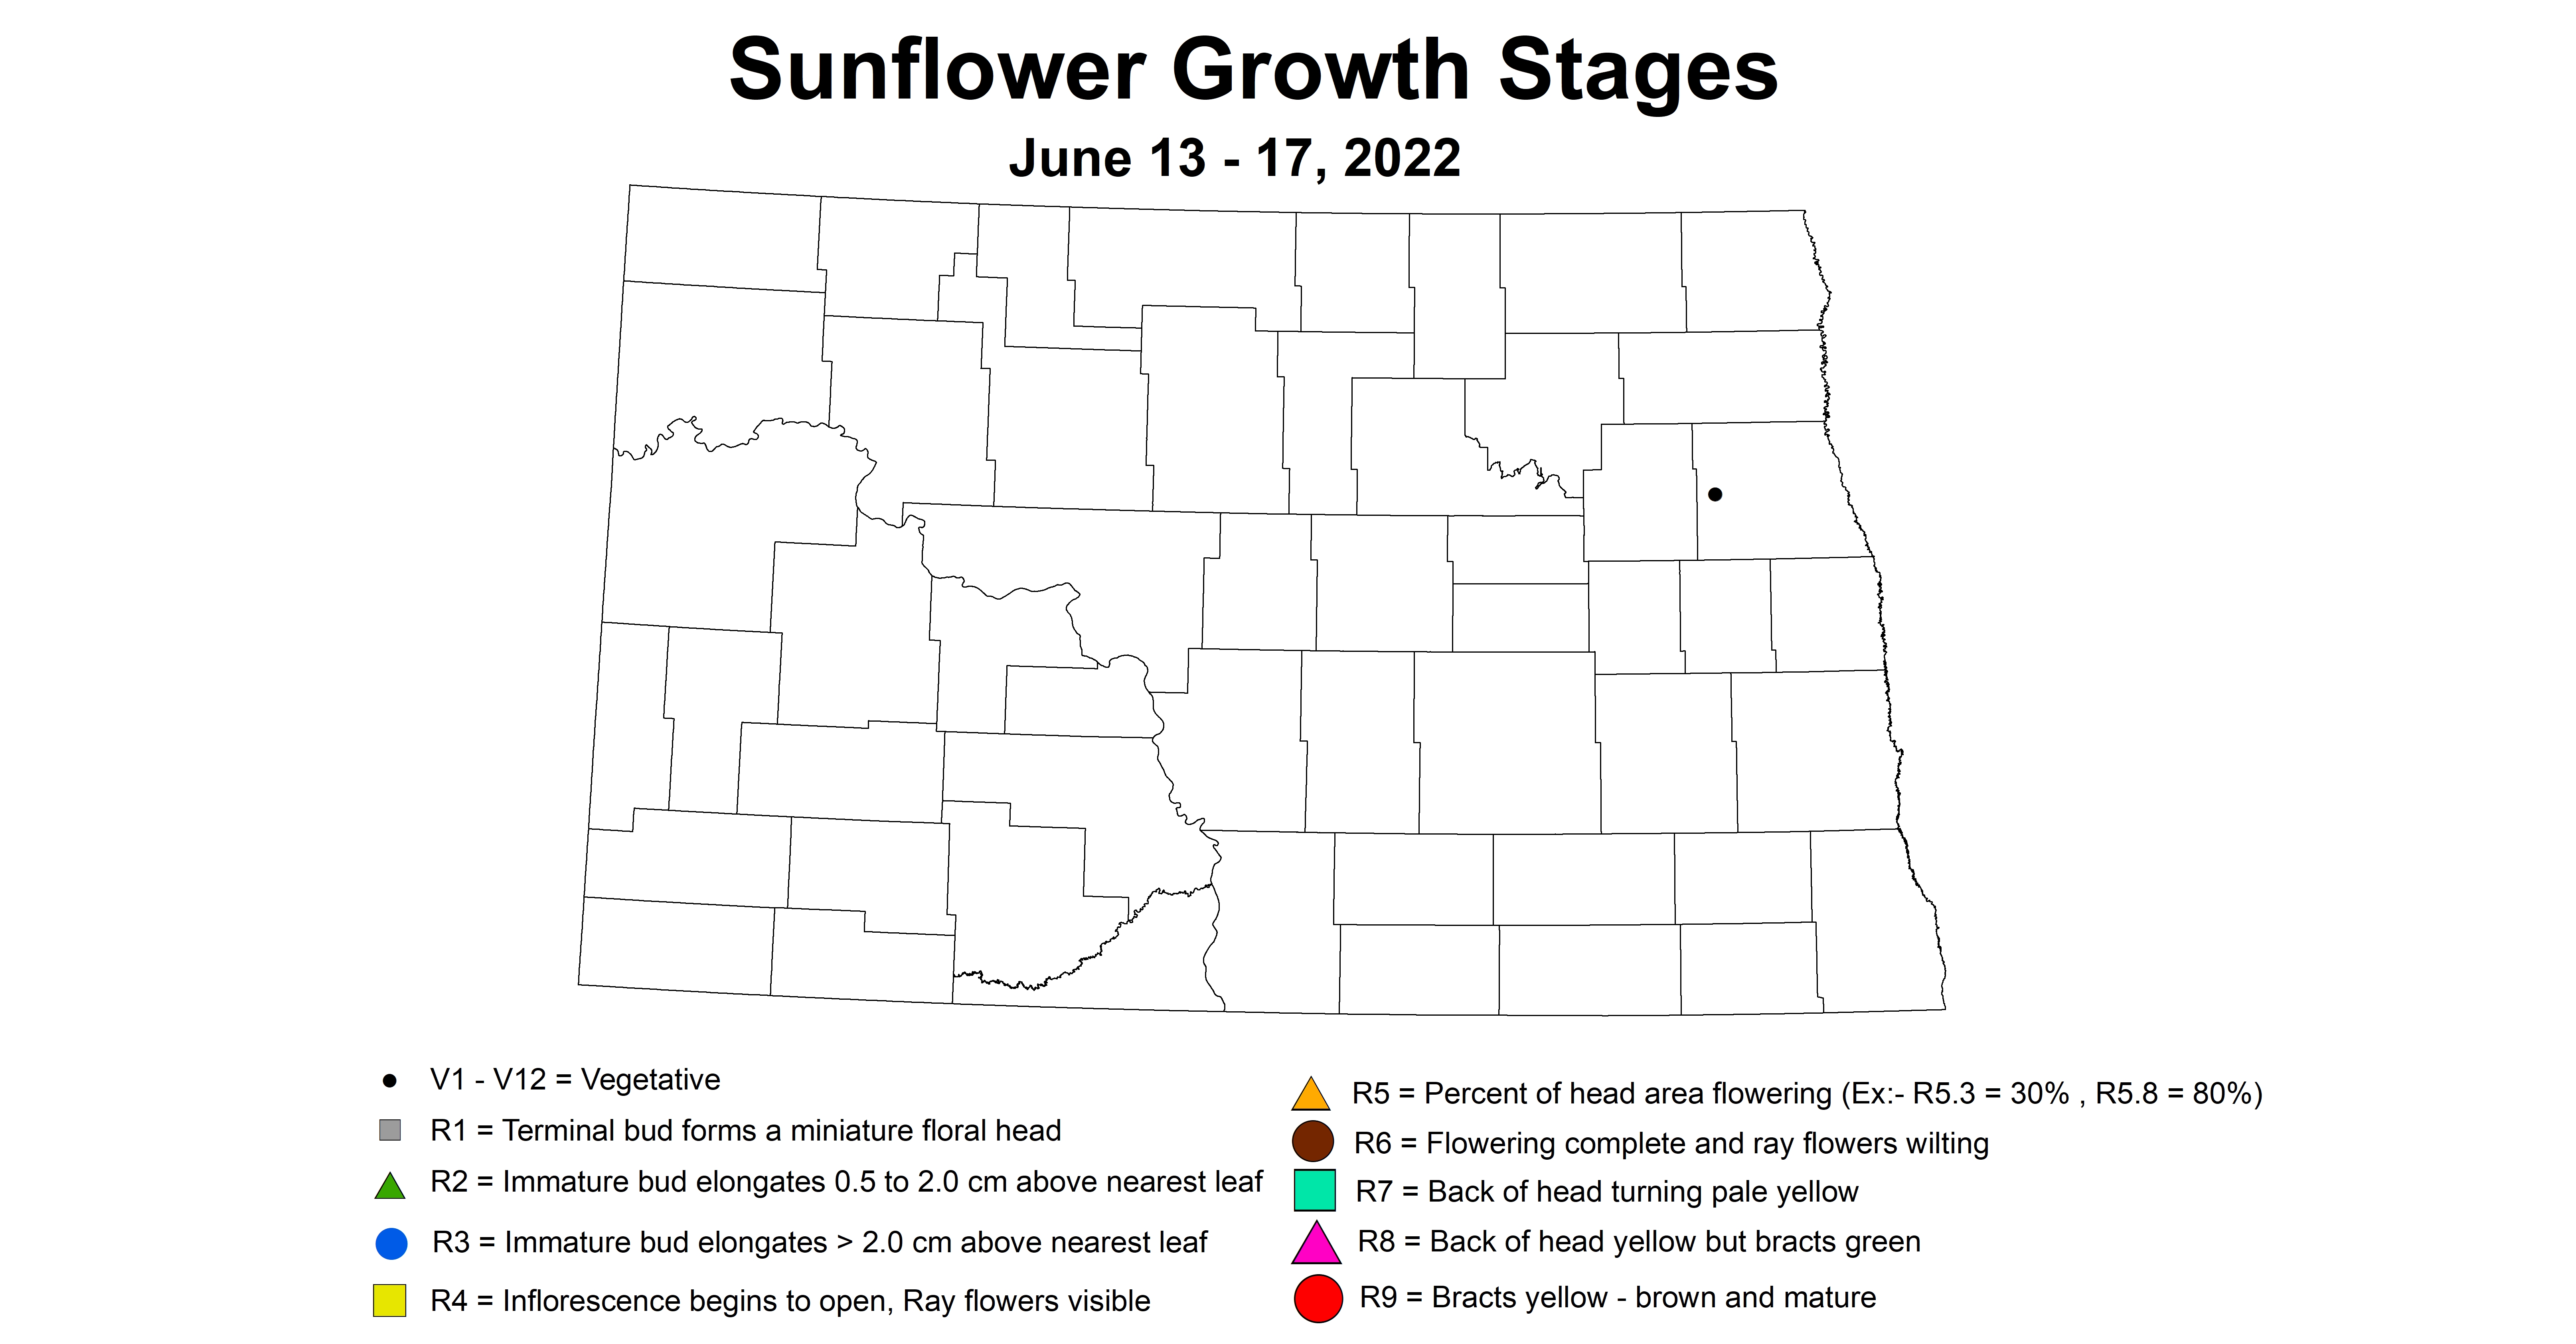 ND IPM map of sunflower growth stages June 13 - 17 2022